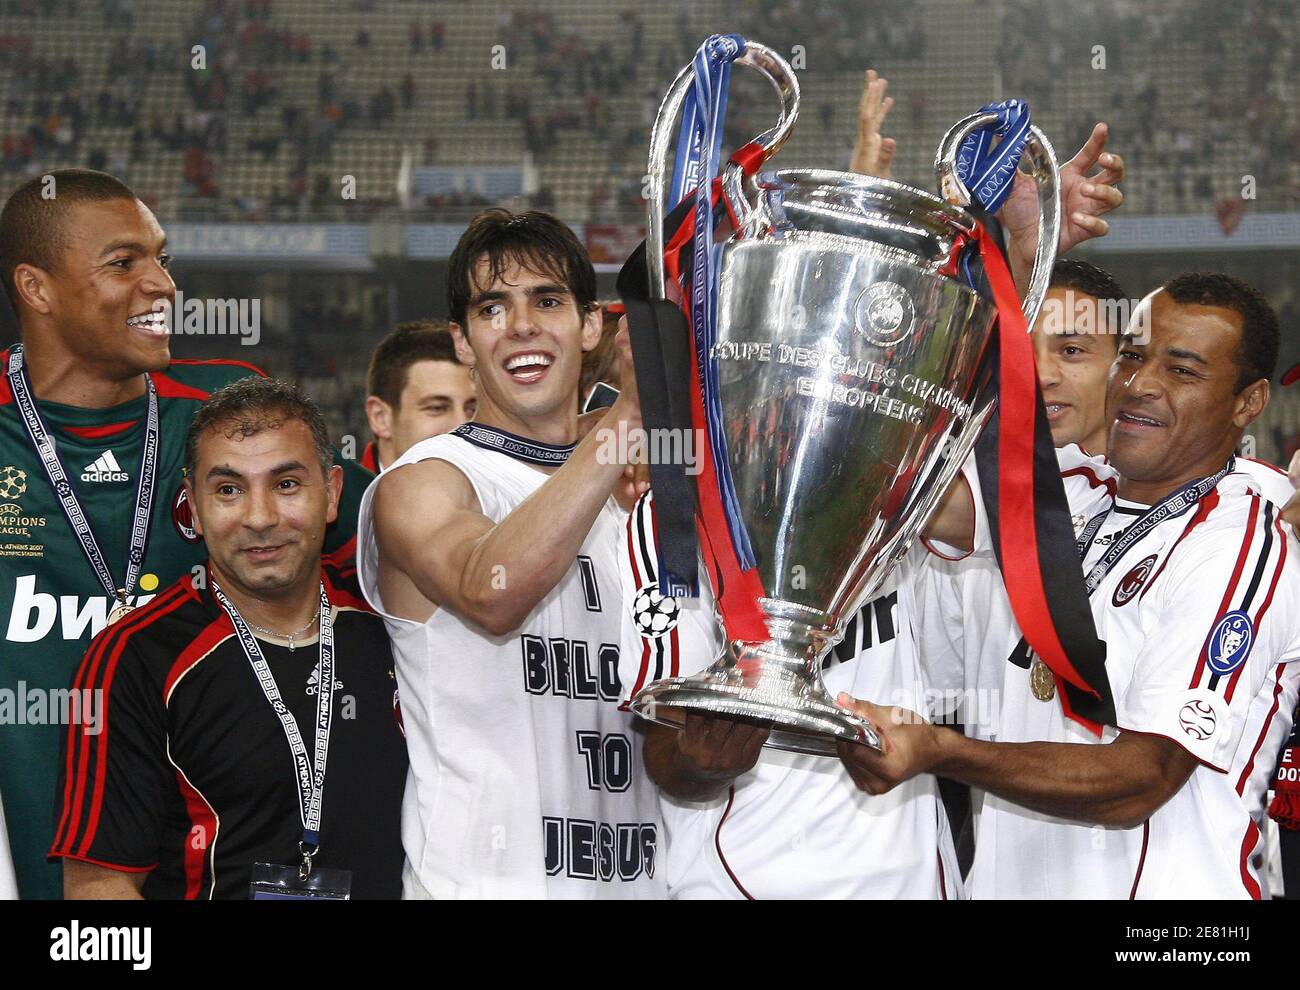 AC Milan's Dida, Kaka and Cafu celebrate with the trophy during the UEFA Champions  League Final, AC Milan v Liverpool at Olympic Stadium, in Athens, Greece,  on May 23, 2007. AC Milan